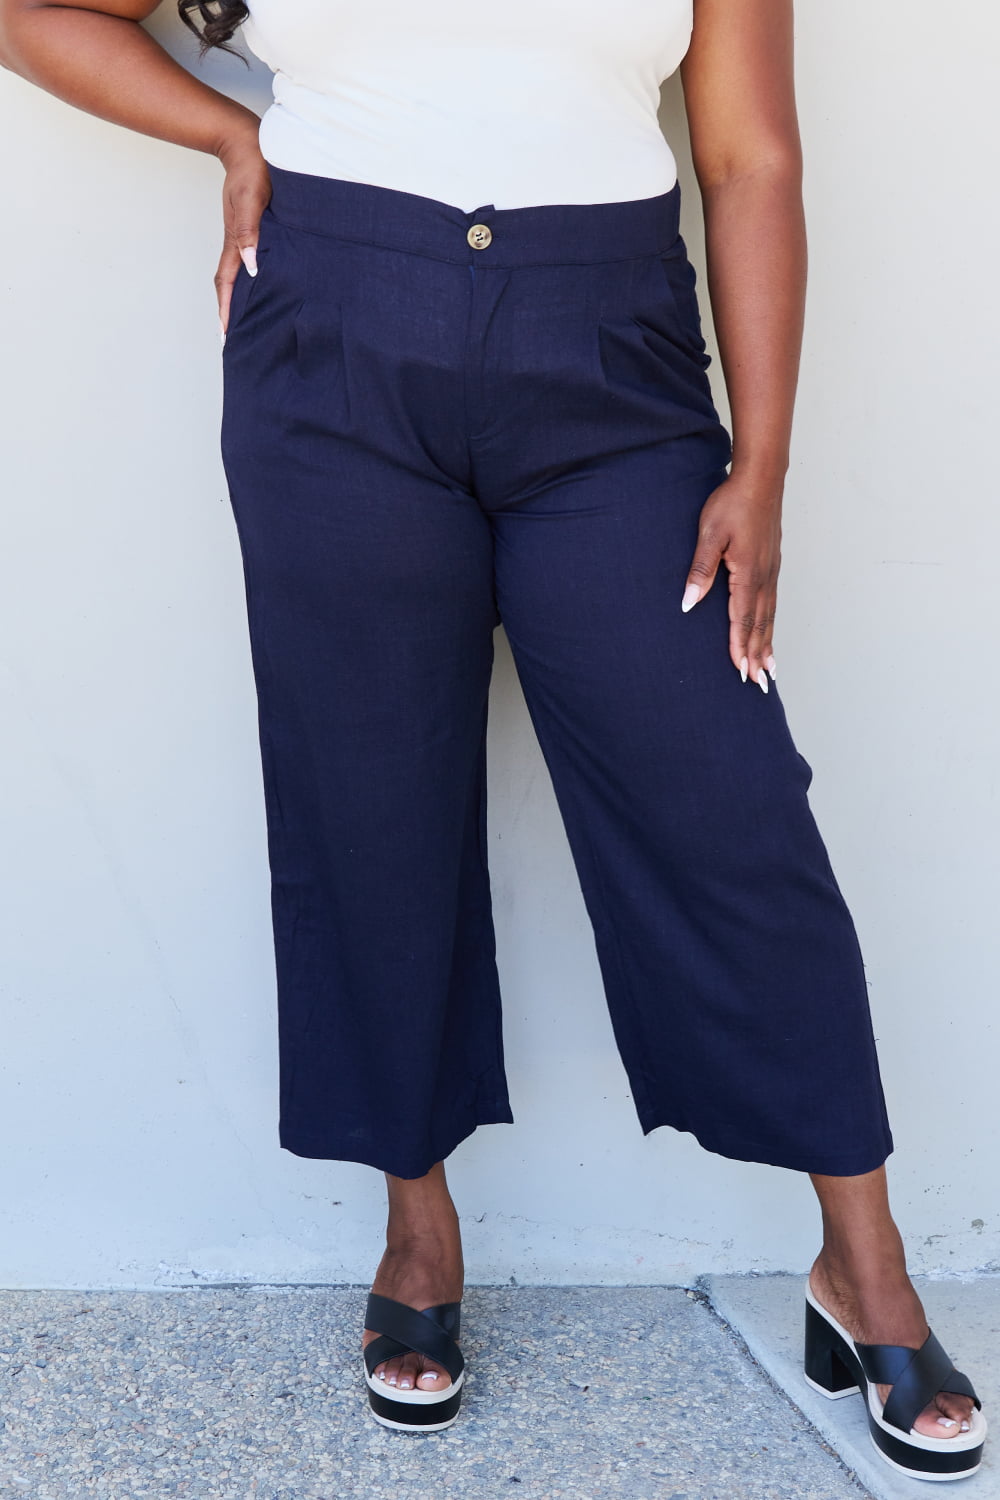 In The Mix Full Size Pleated Detail Linen Pants in Dark Navy - Bottoms - Pants - 6 - 2024